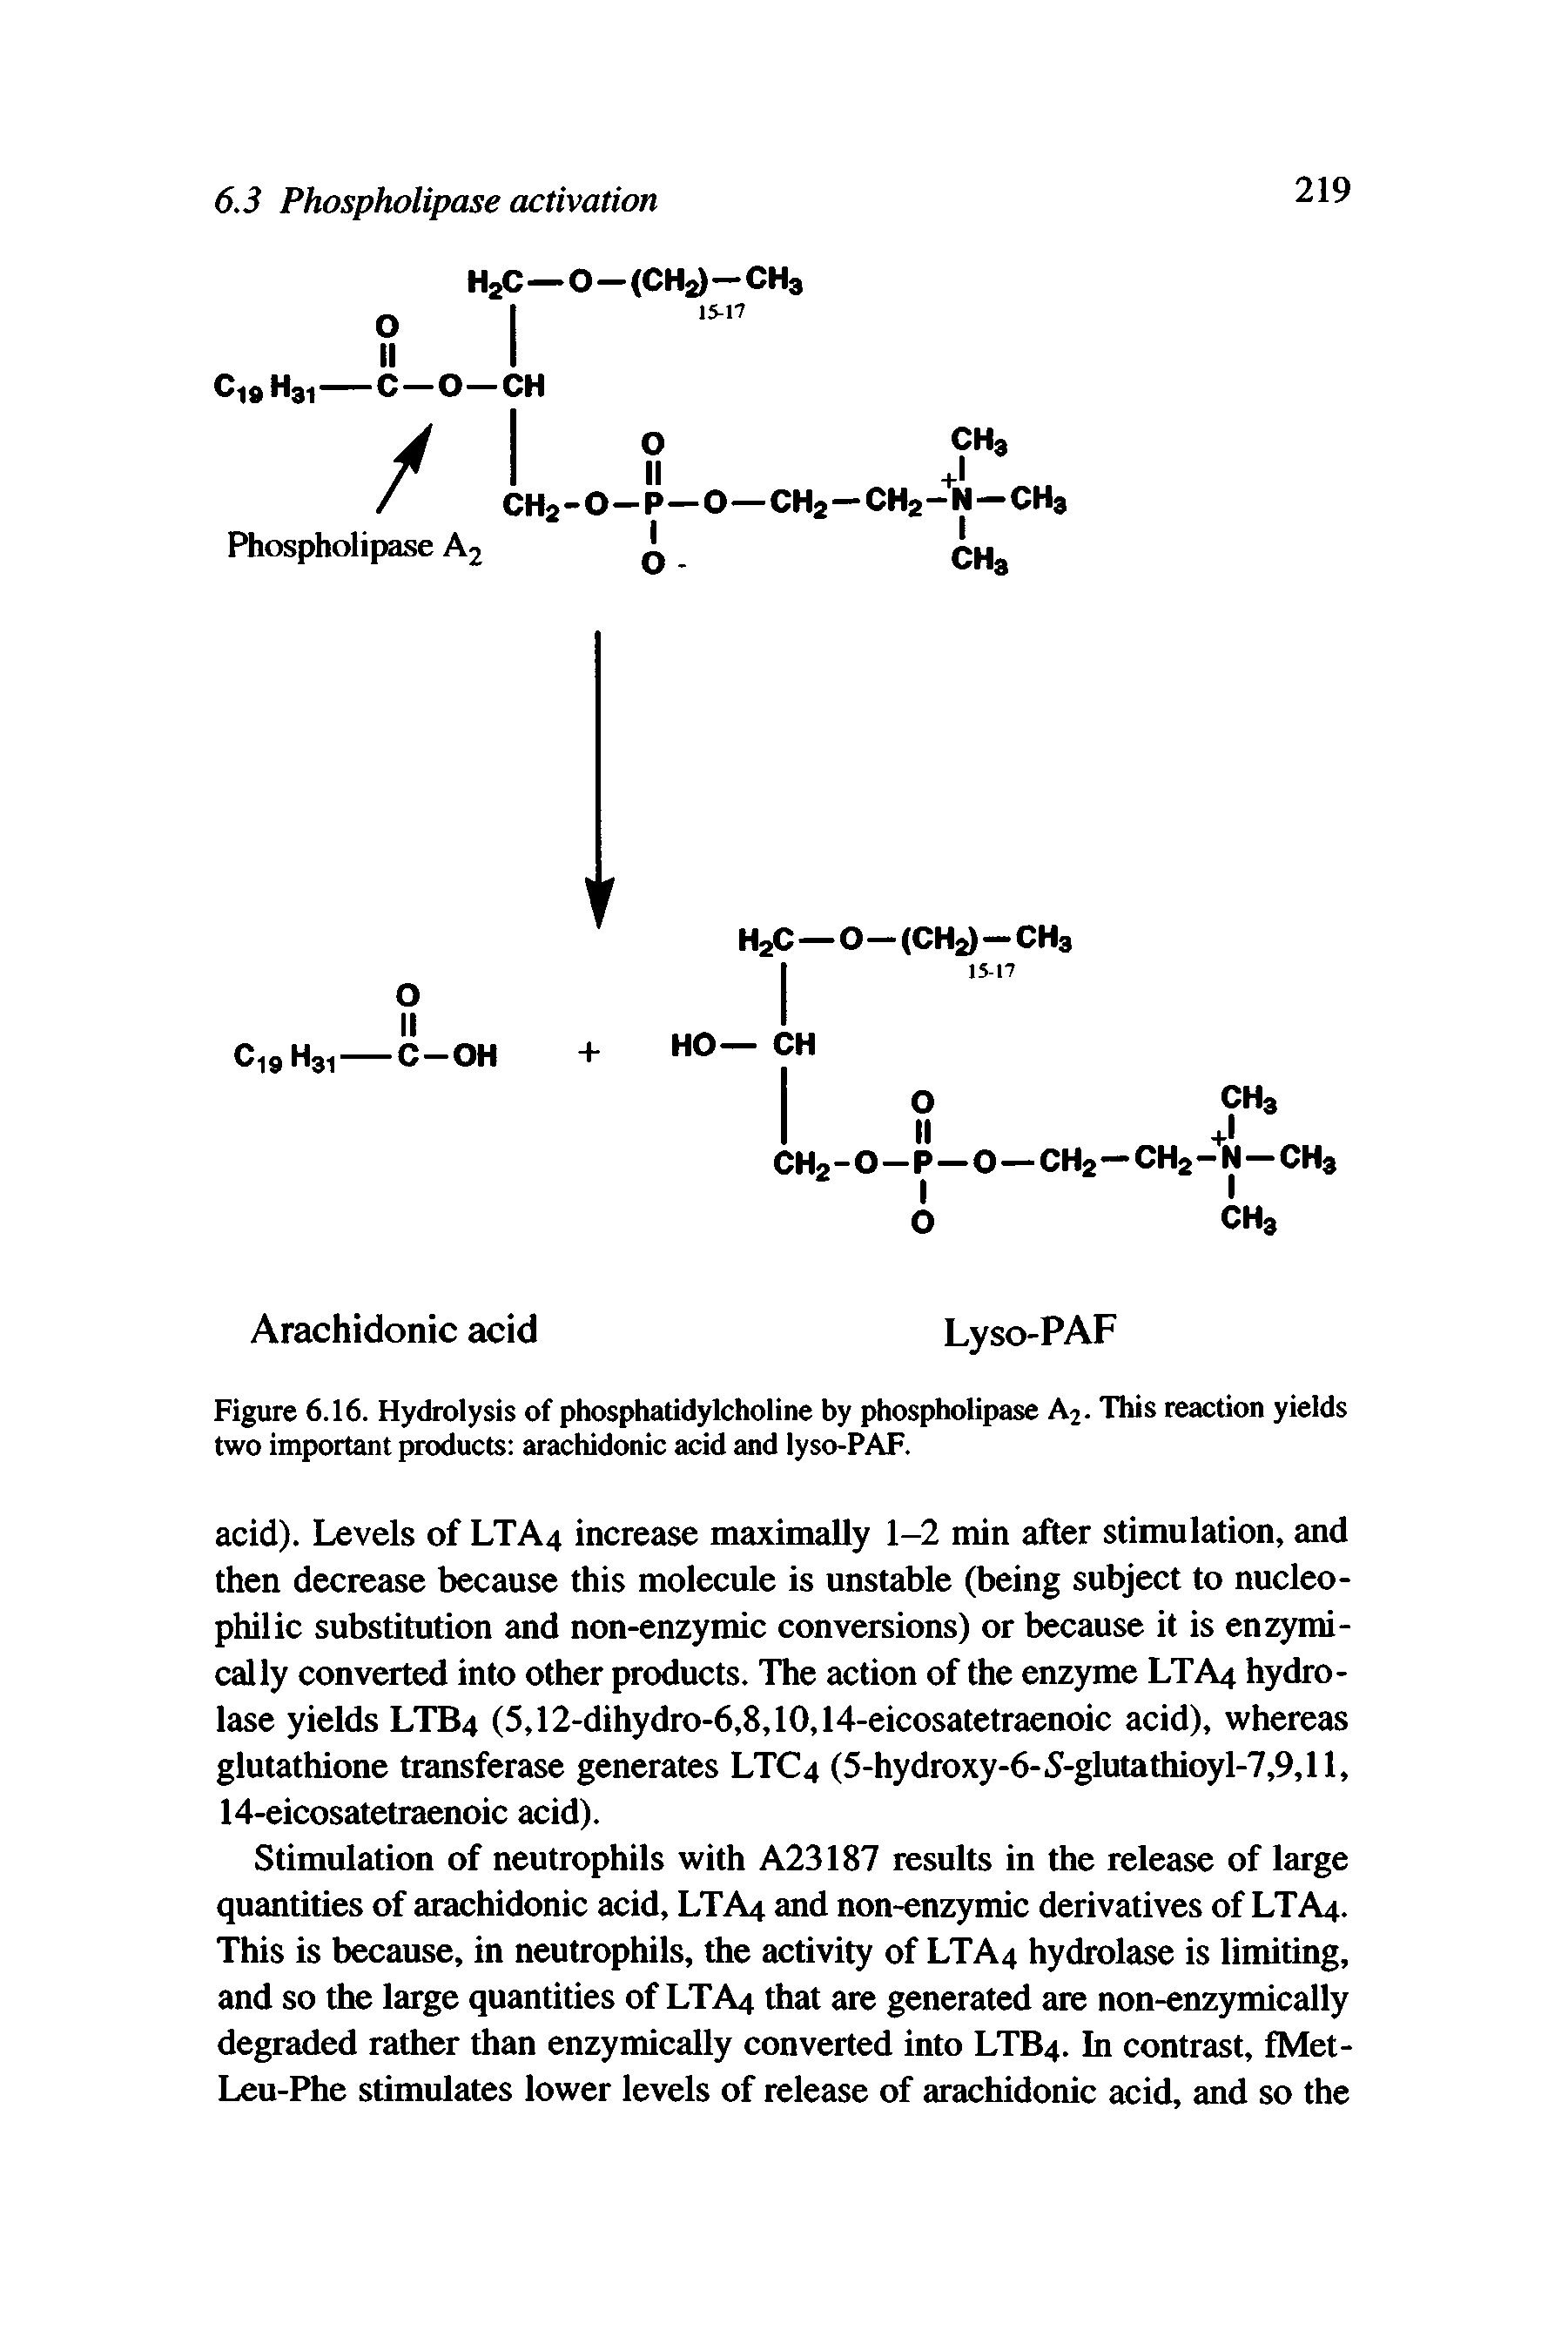 Figure 6.16. Hydrolysis of phosphatidylcholine by phospholipase A2. This reaction yields two important products arachidonic acid and lyso-PAF.